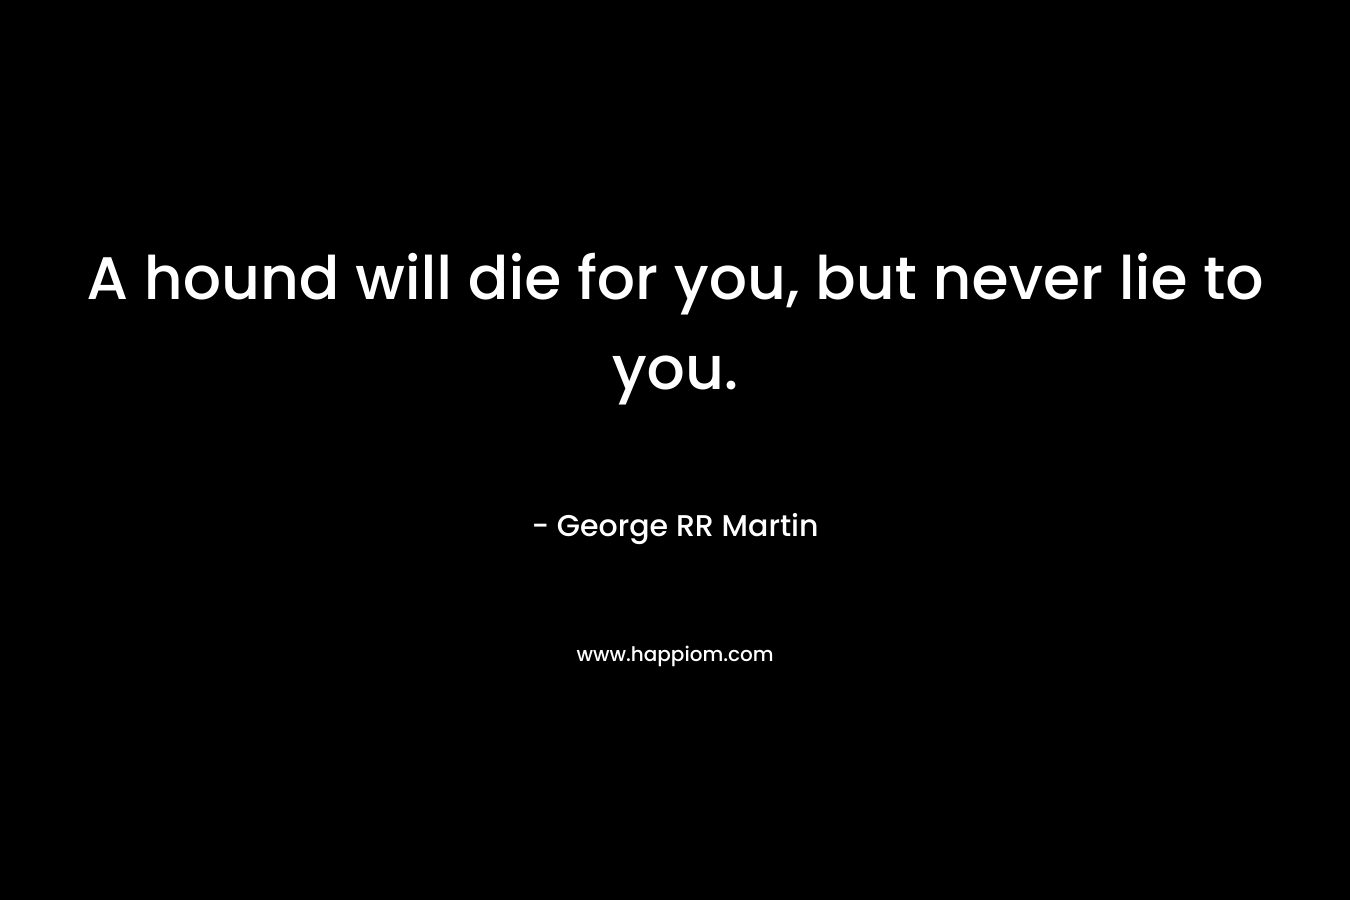 A hound will die for you, but never lie to you. – George RR Martin